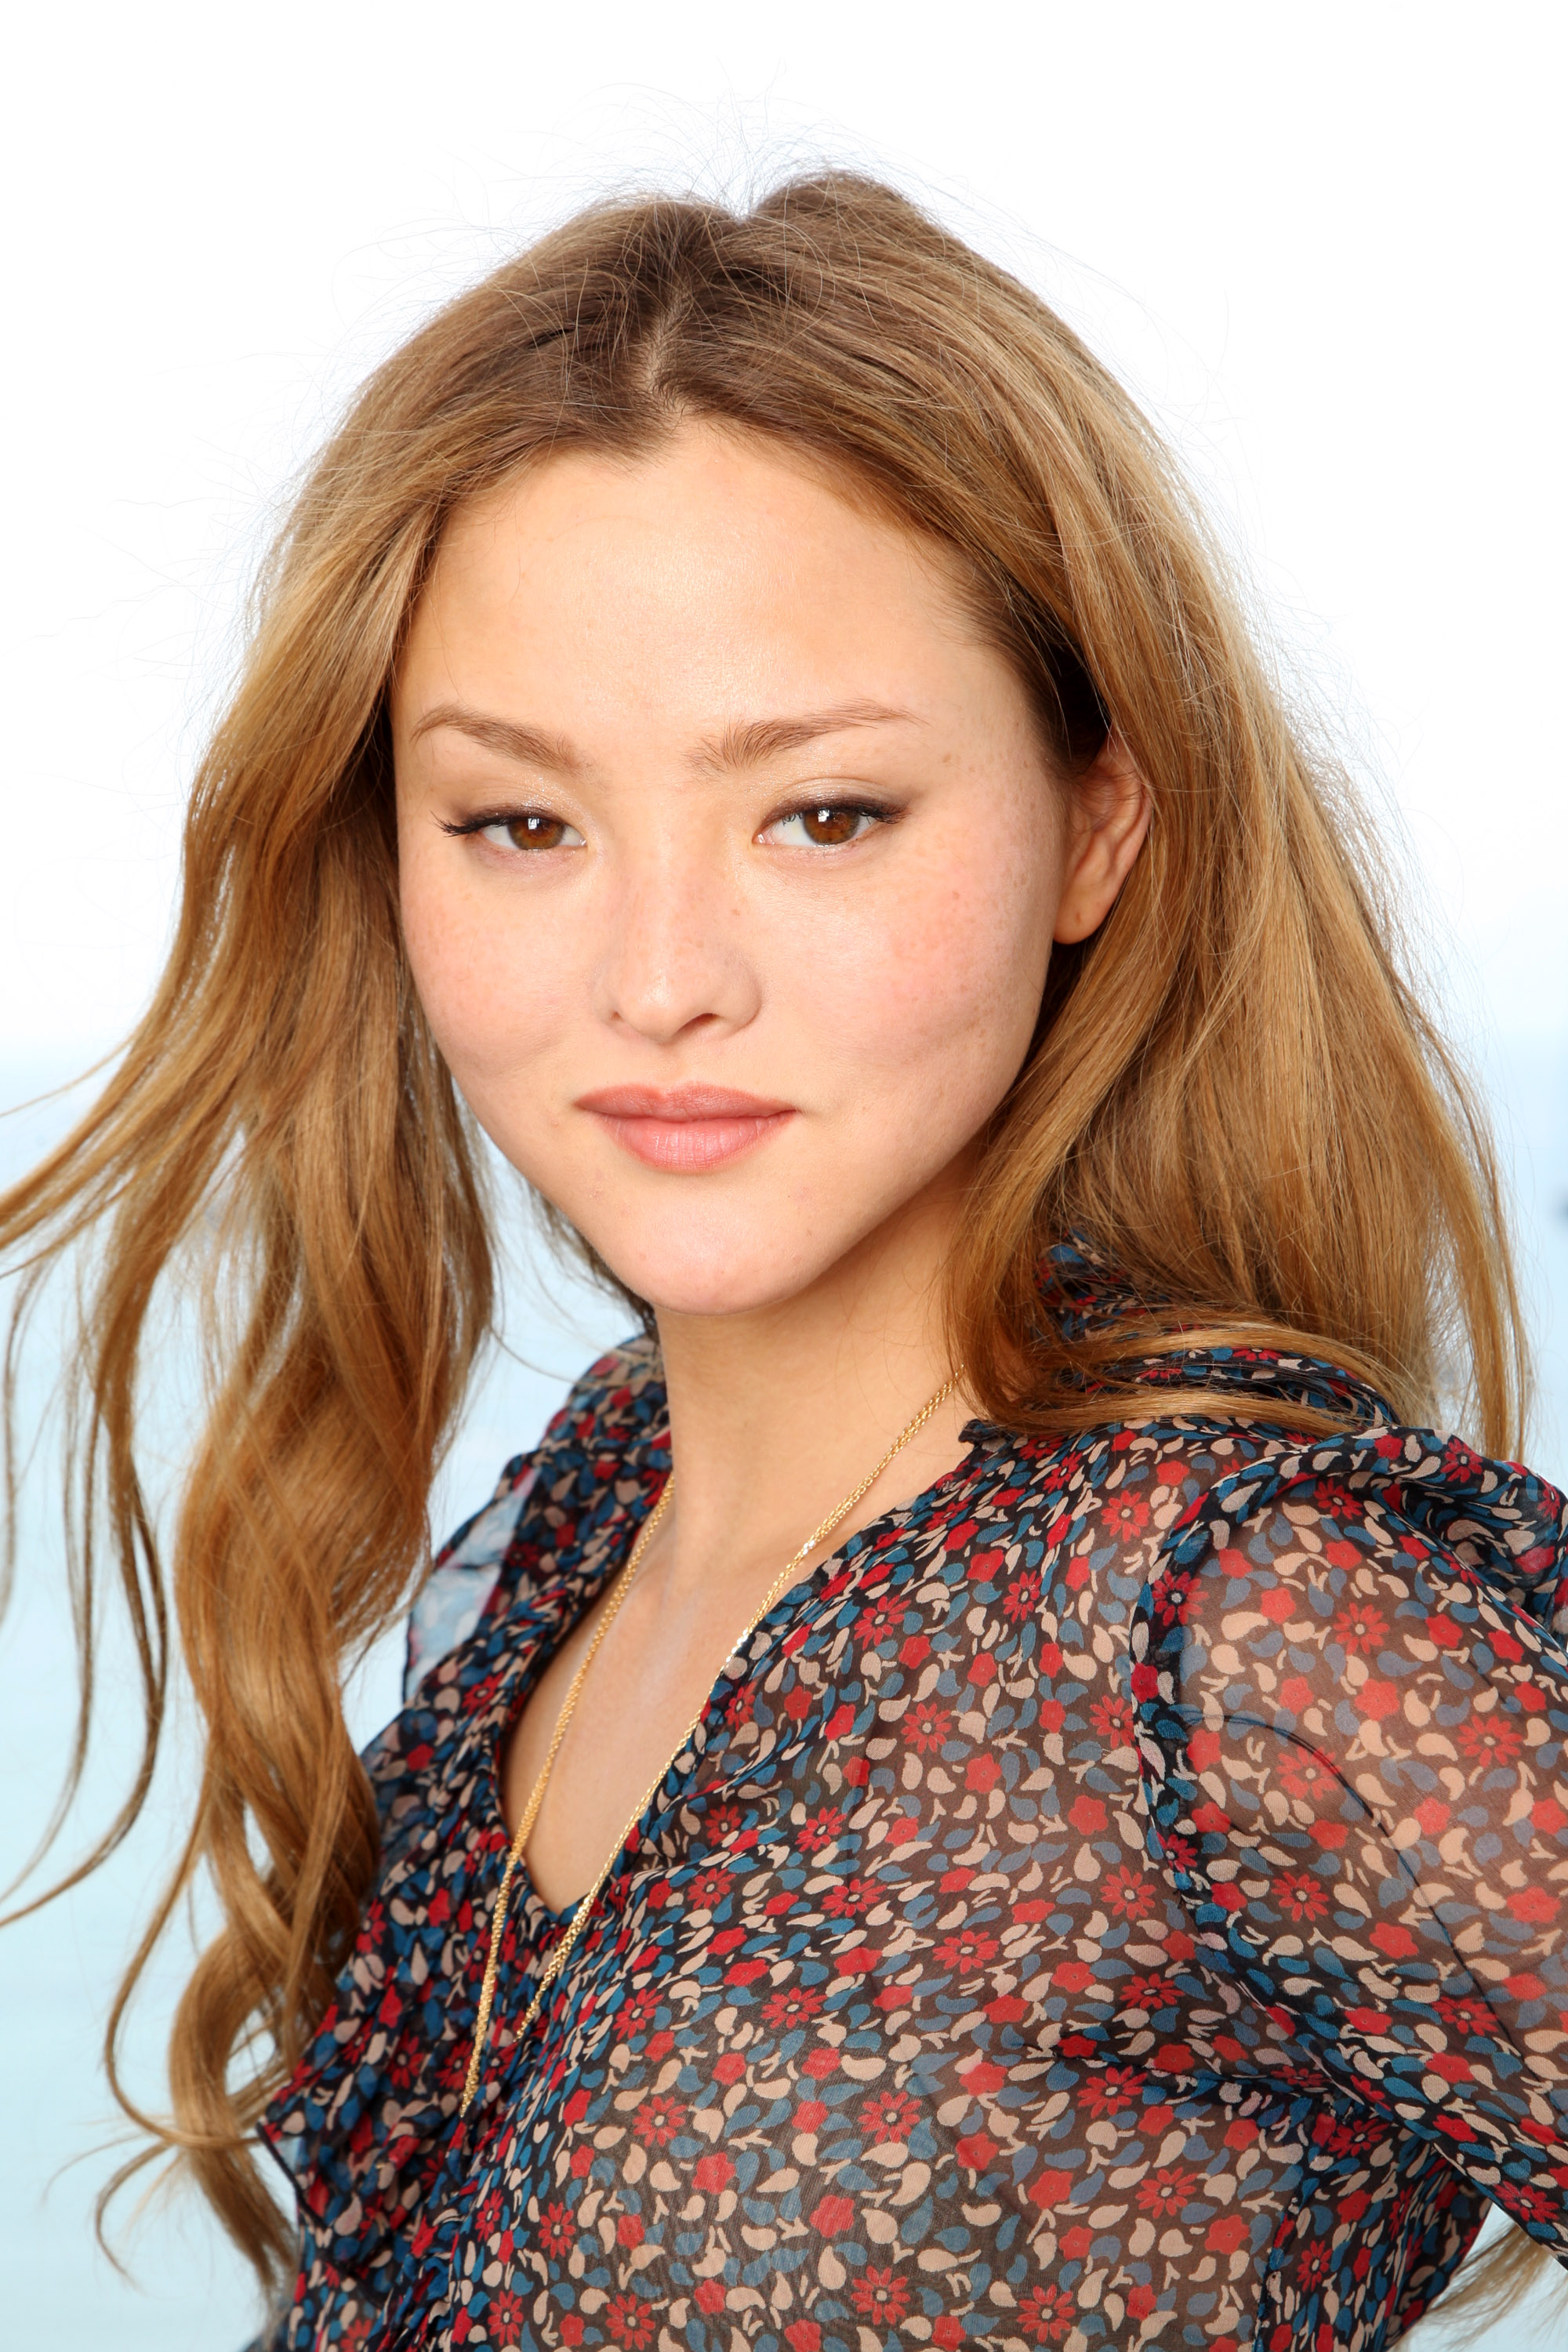 Amazing Devon Aoki Pictures & Backgrounds